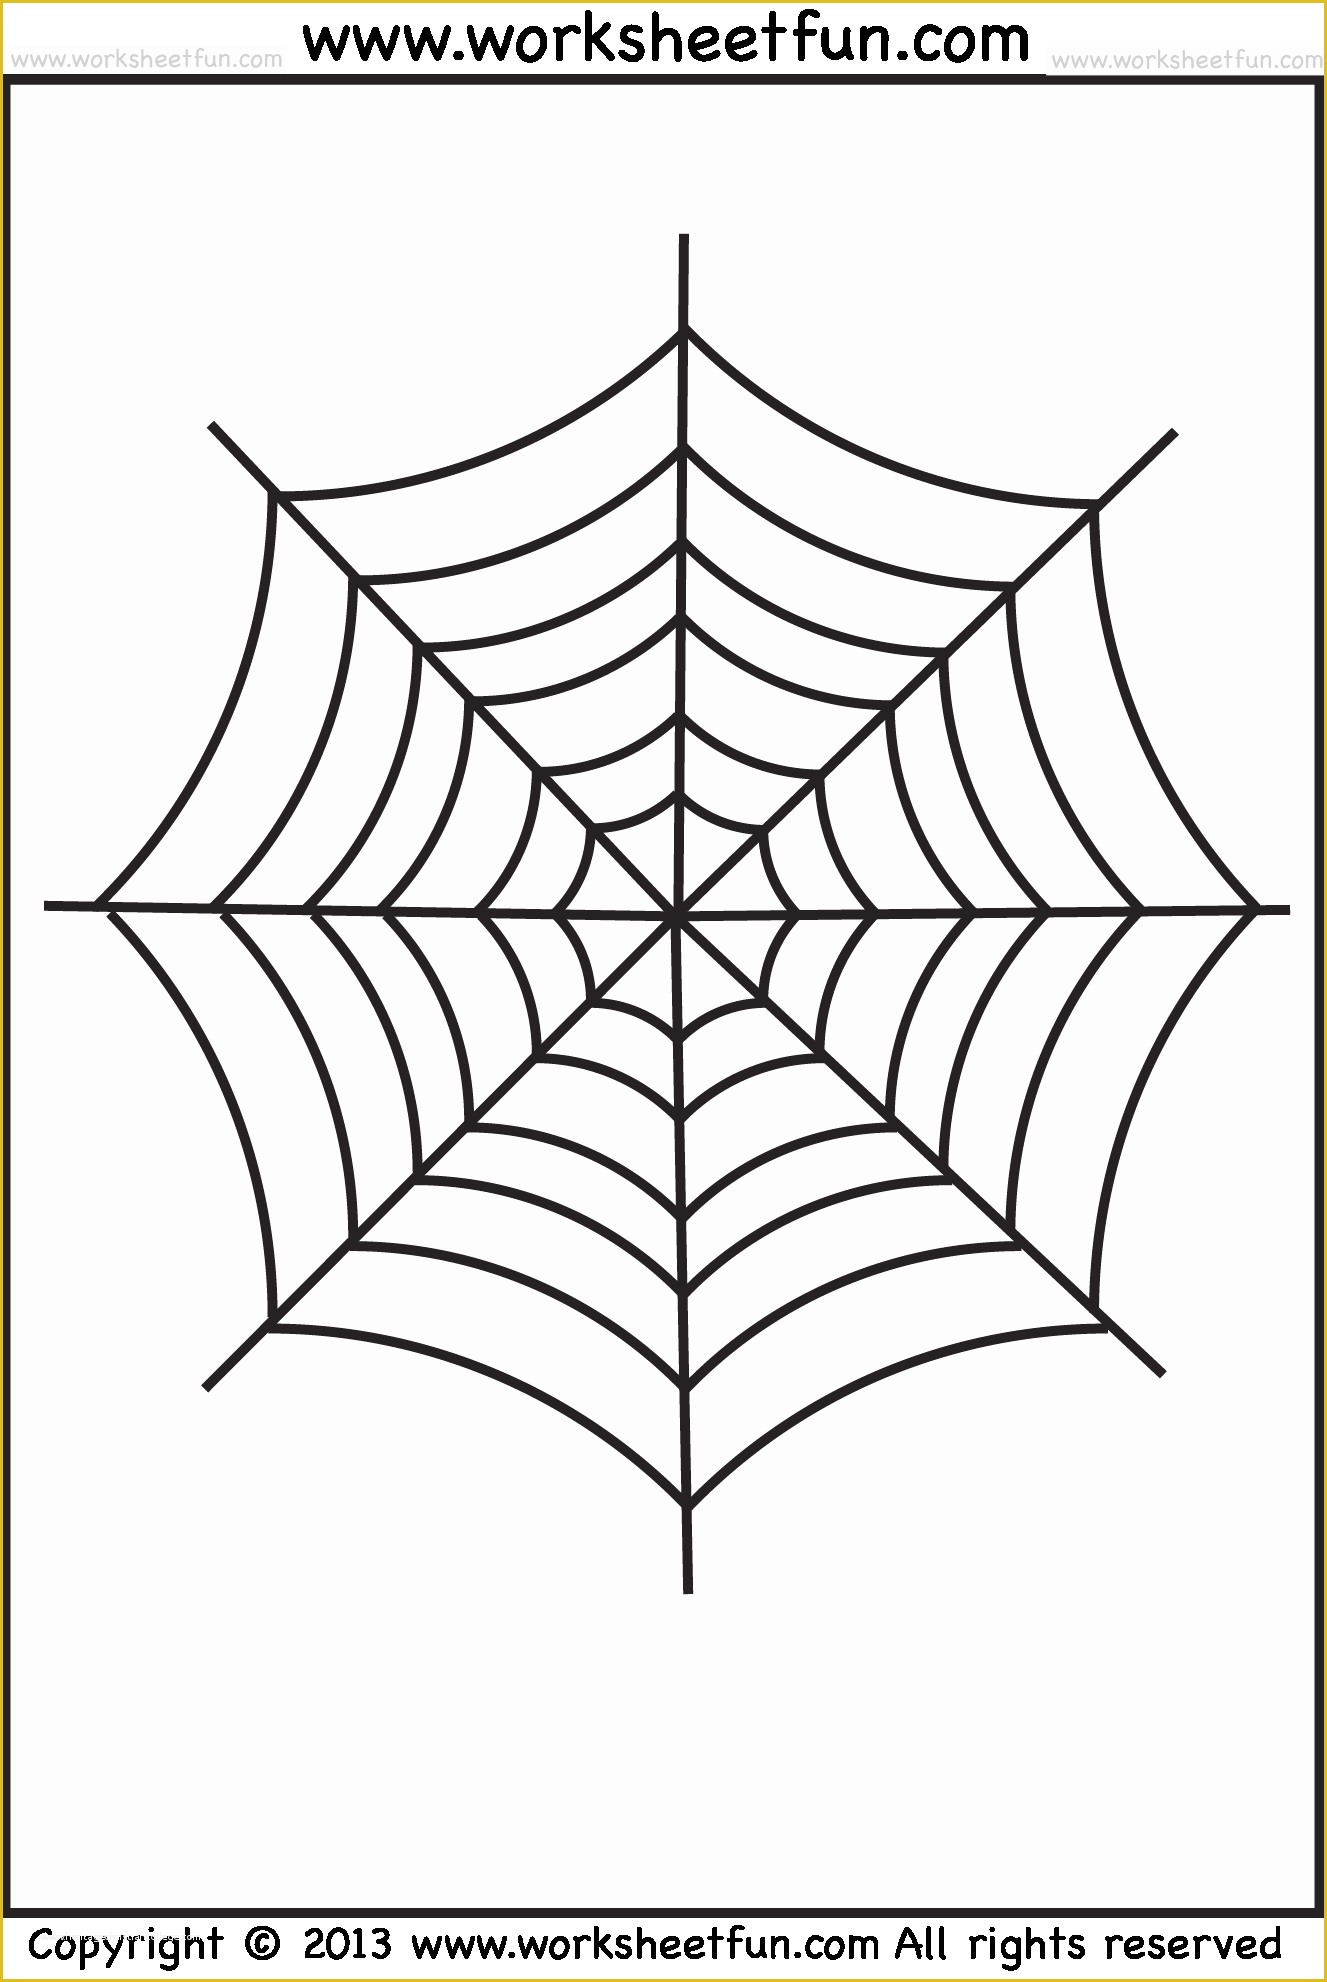 Printing Website Template Free Of Spider Web Tracing and Coloring – 2 Halloween Worksheets